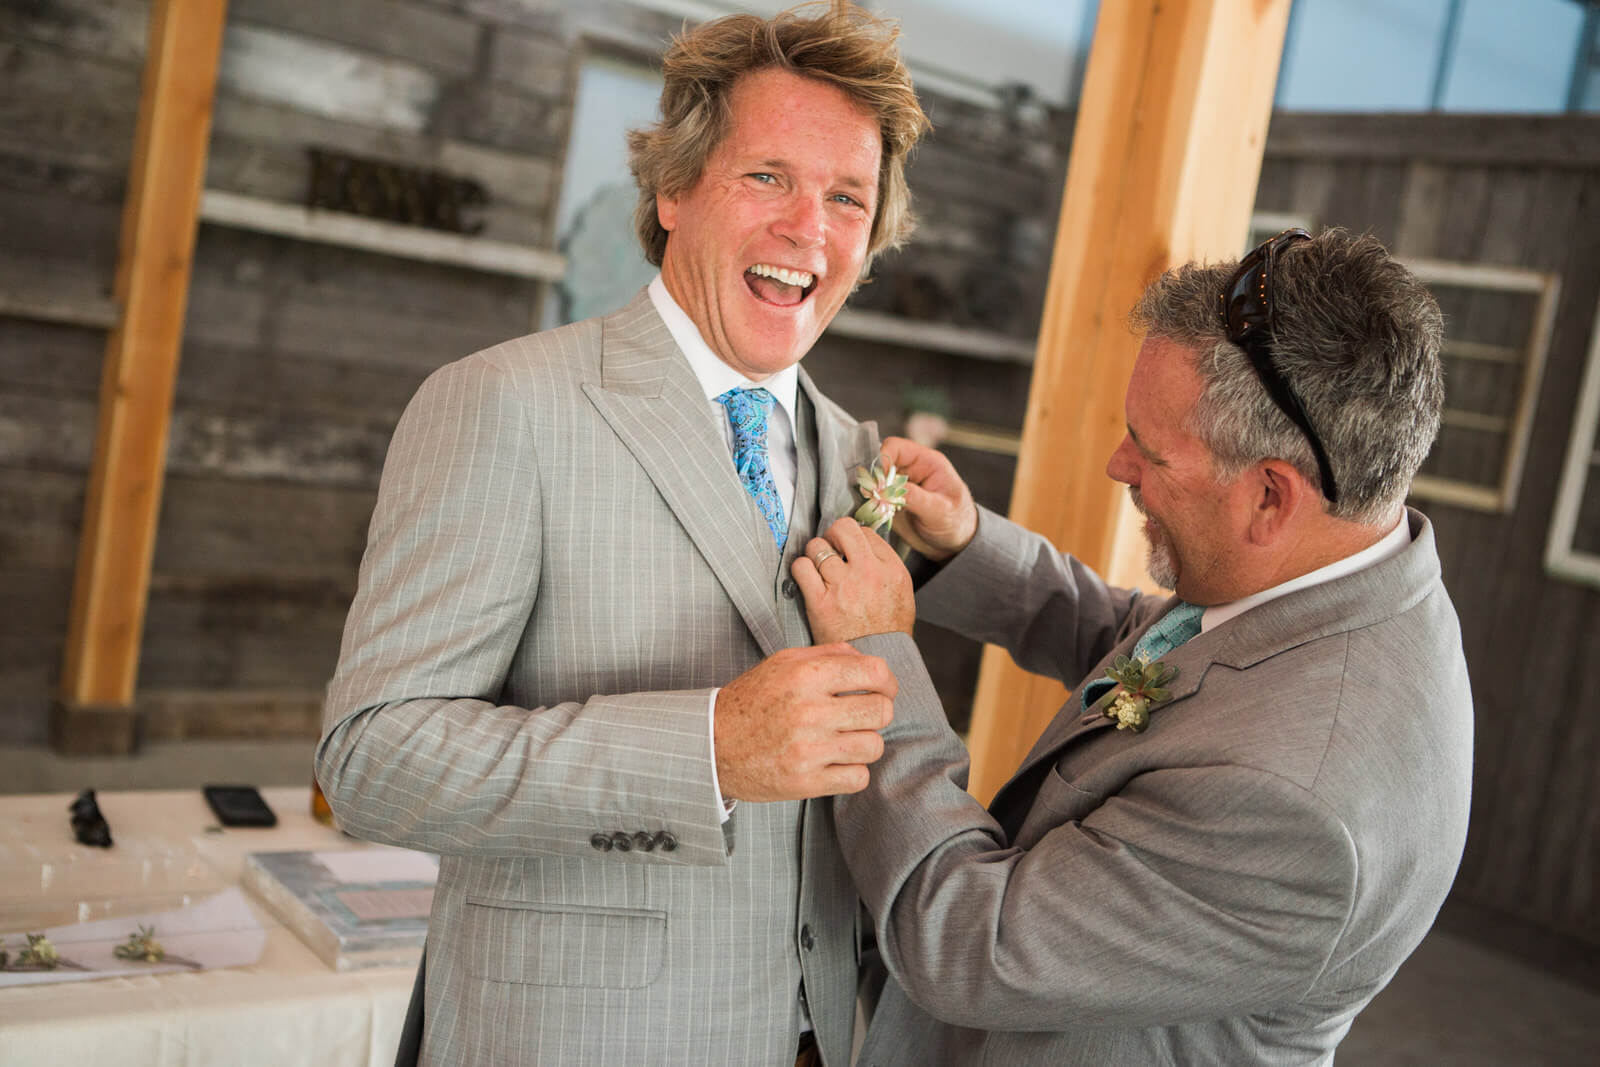 A groom laughs as his brother pins on his boutonnière during his wedding day at Sky Ridge Ranch in Ronan Montana